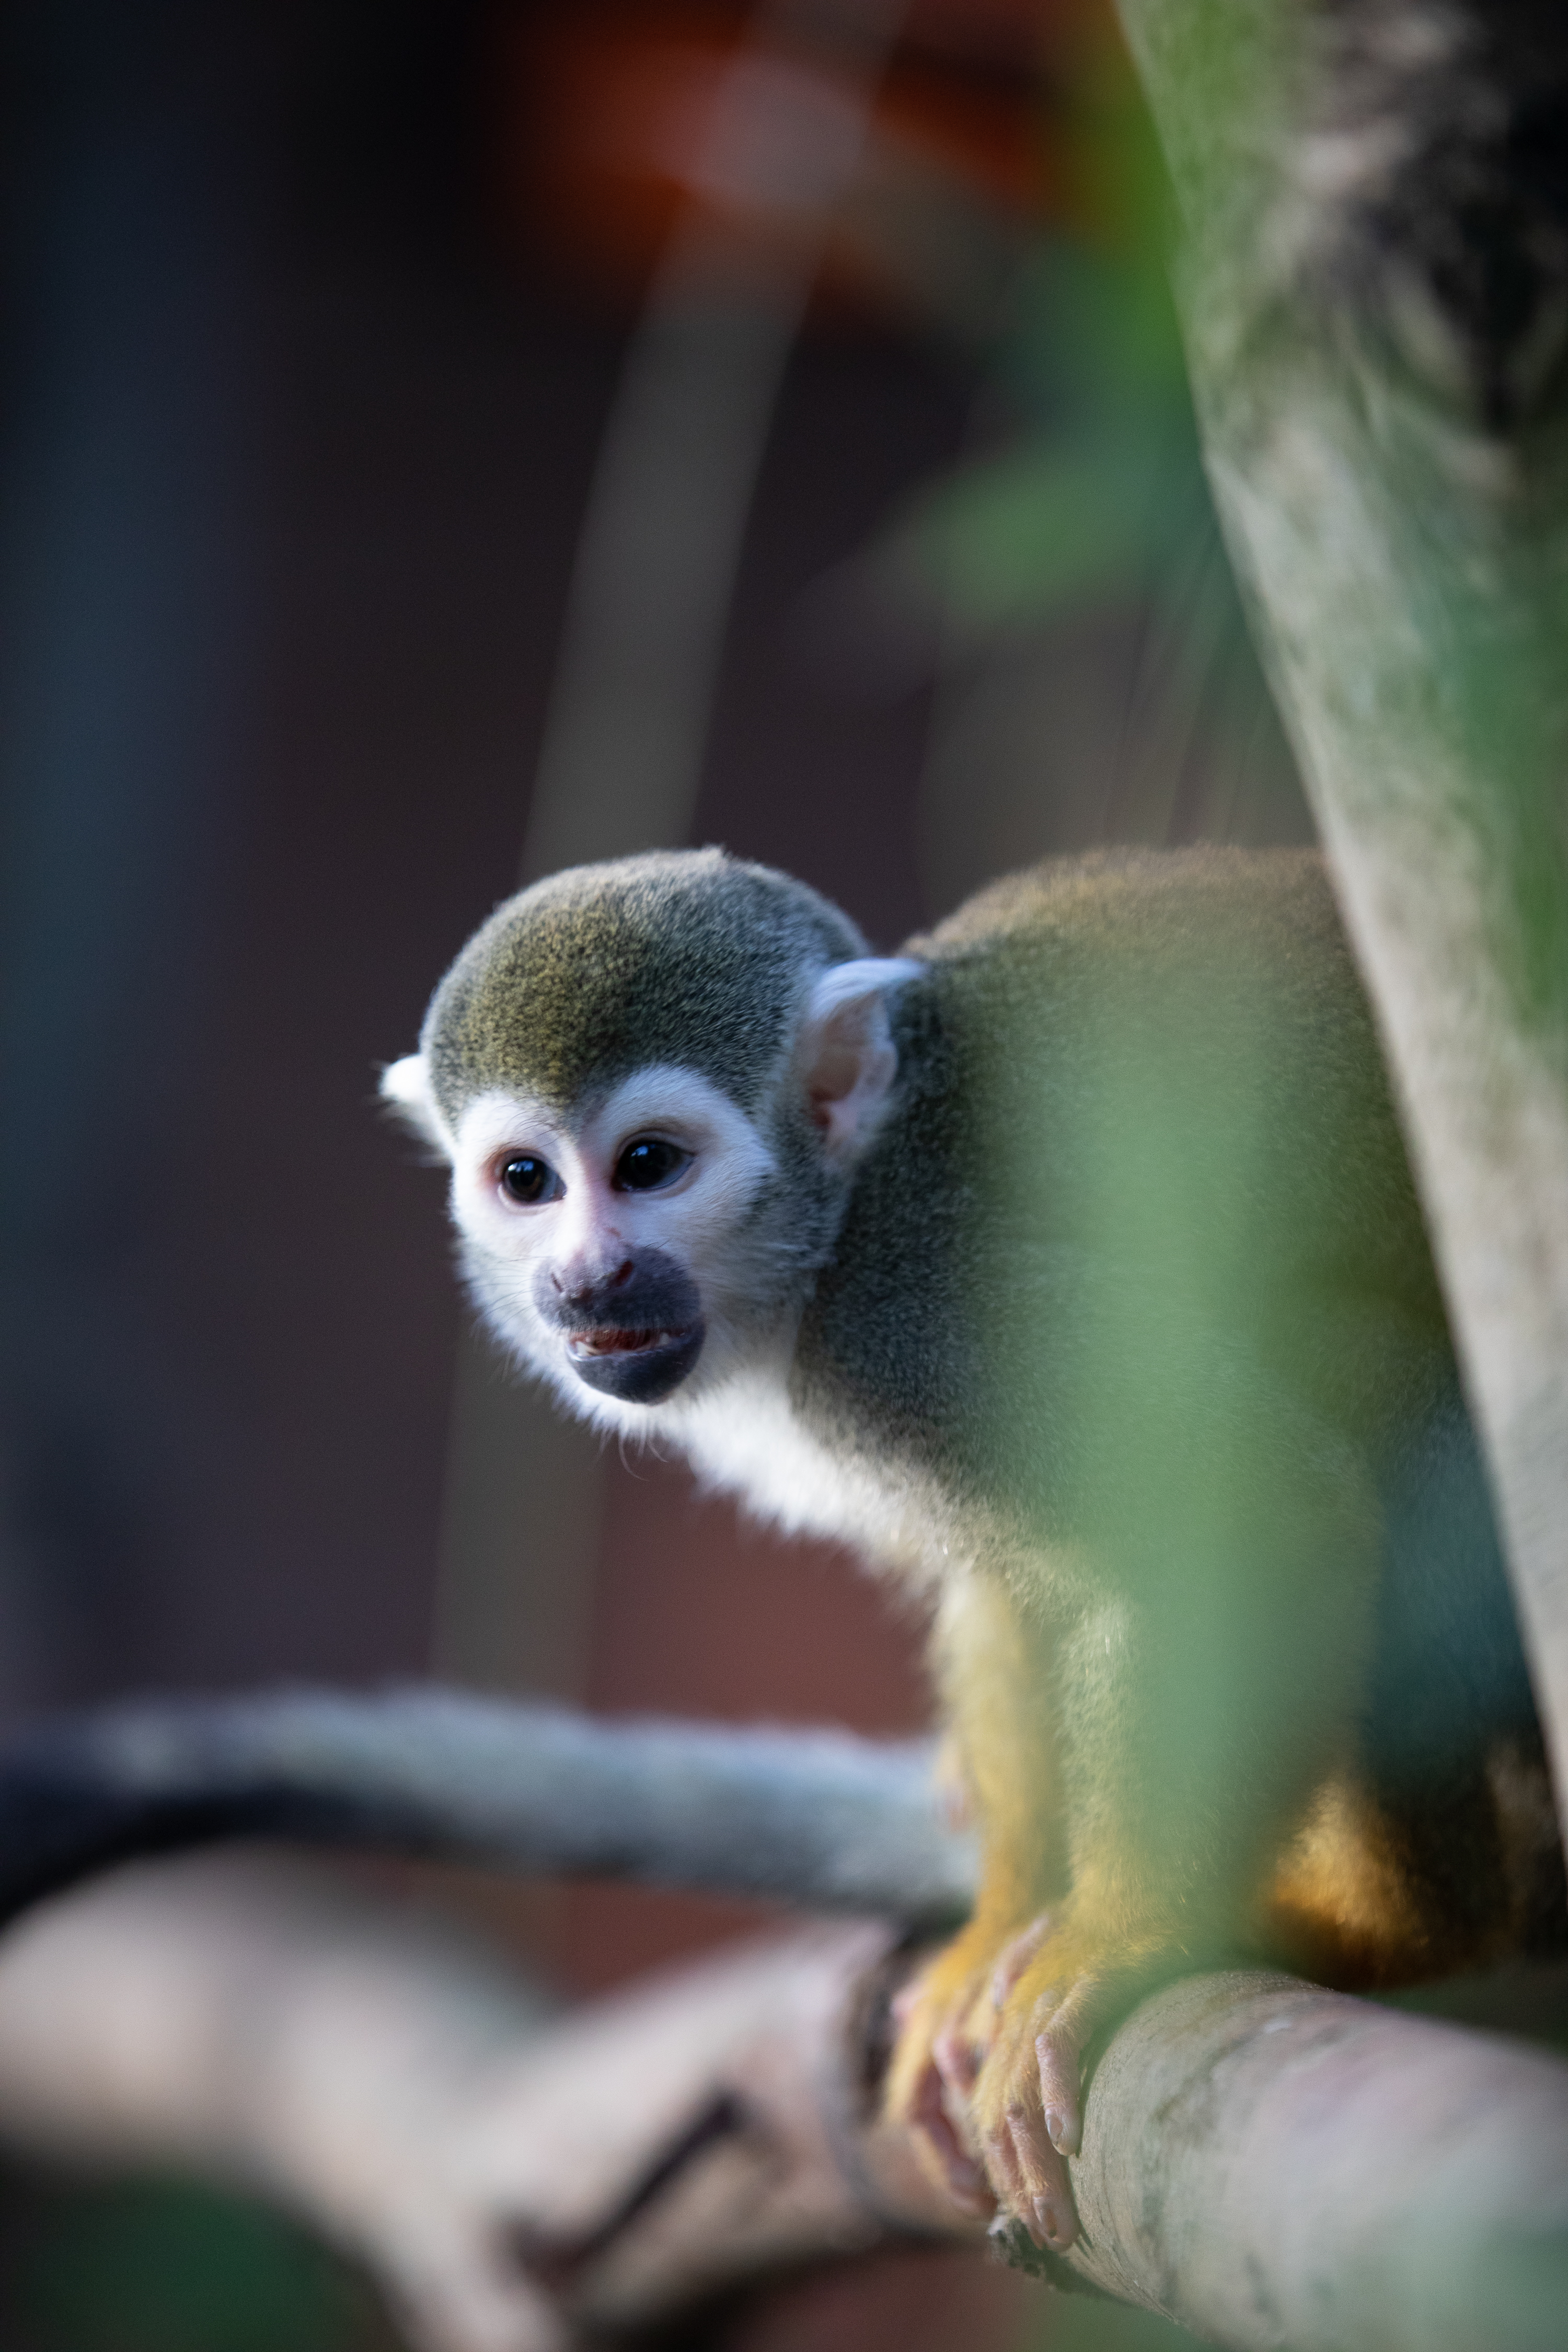 a squirrel monkey on a tree branch